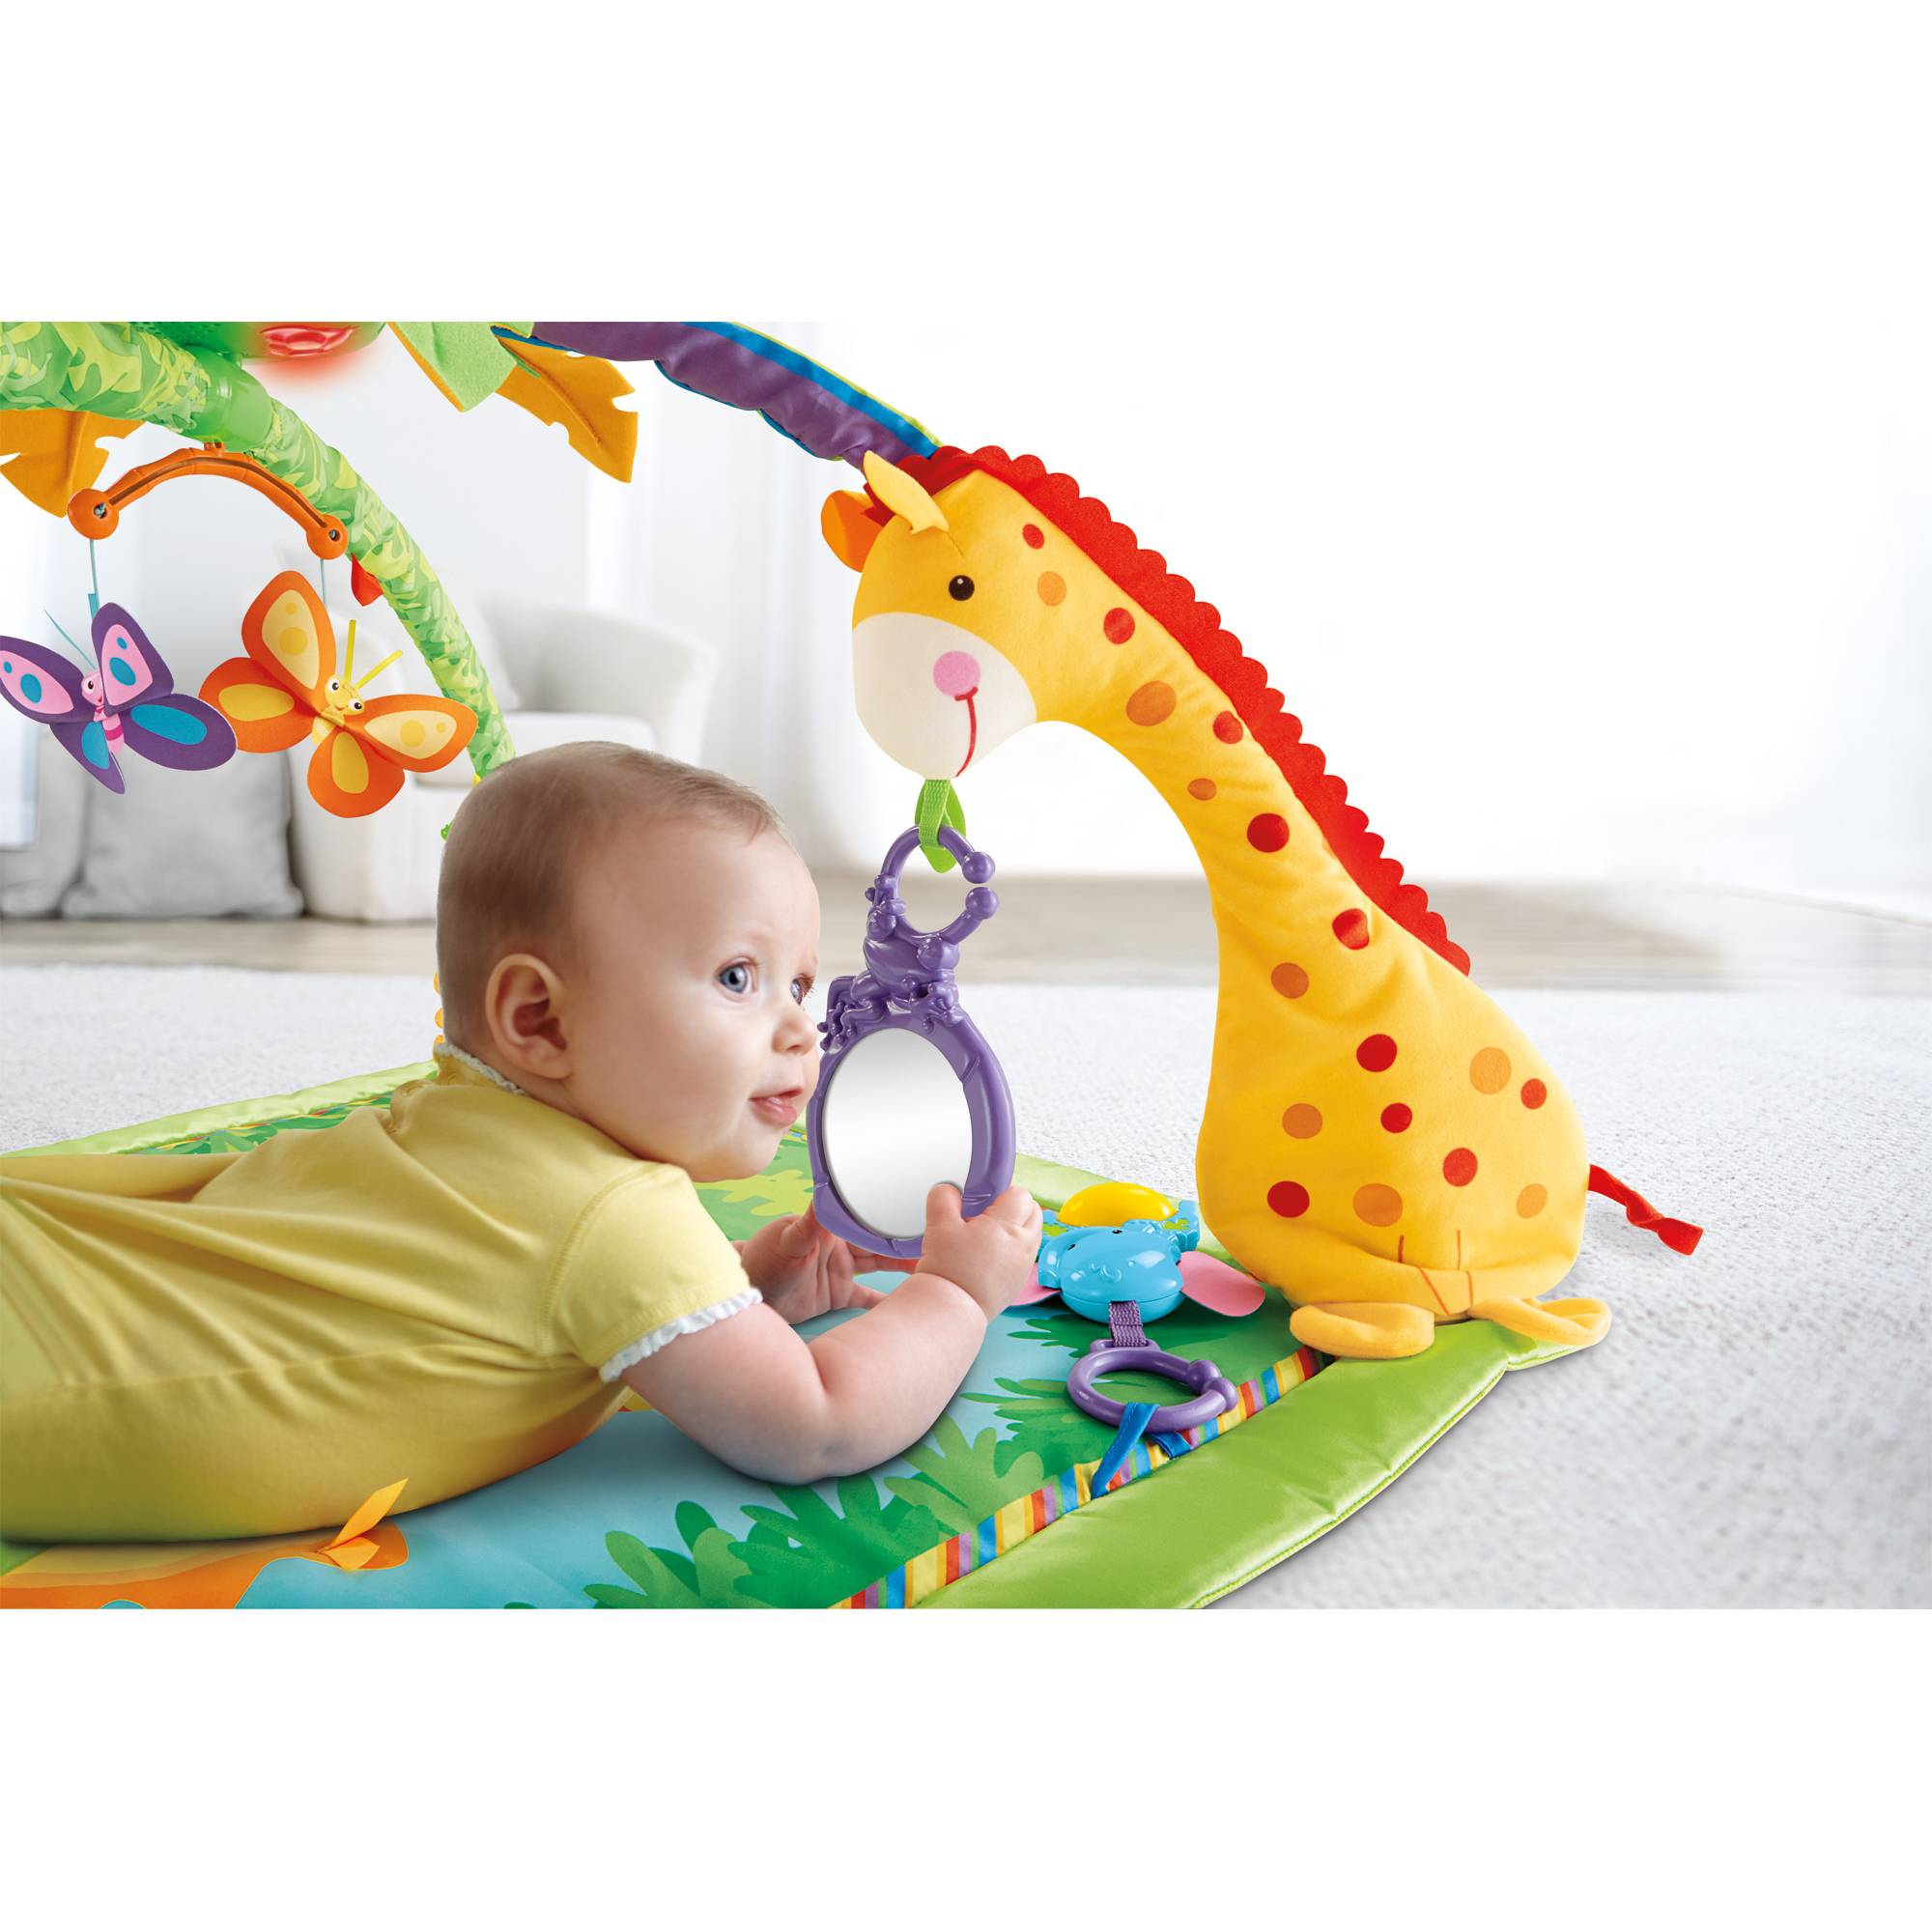 Fisher-Price Rainforest Melodies & Lights Deluxe Play Gym - image 5 of 9